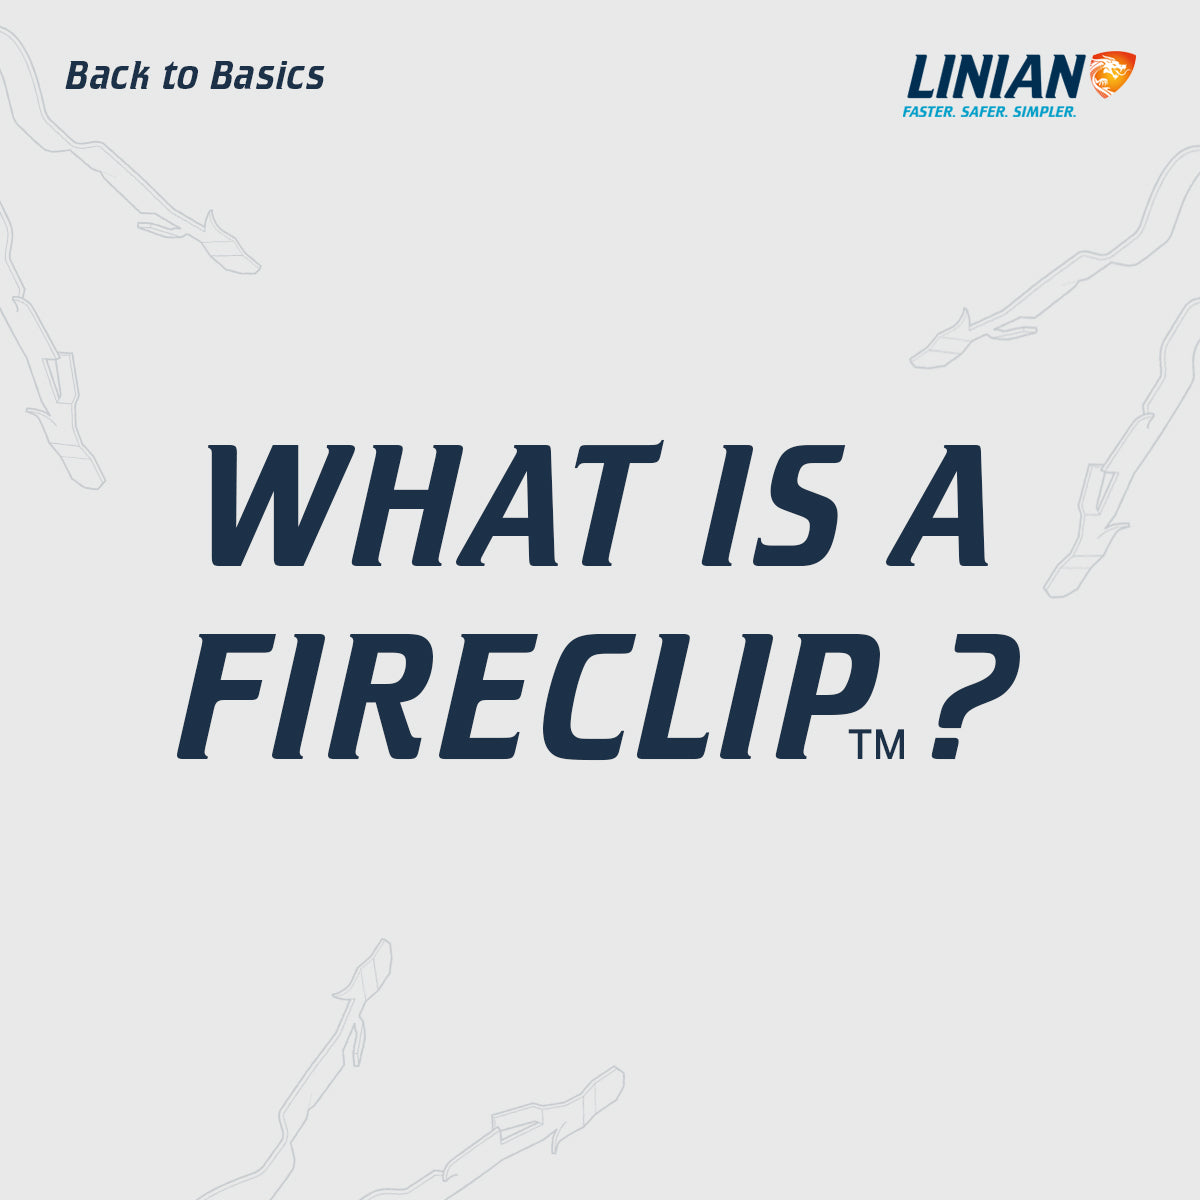 What is the LINIAN FireClip™?